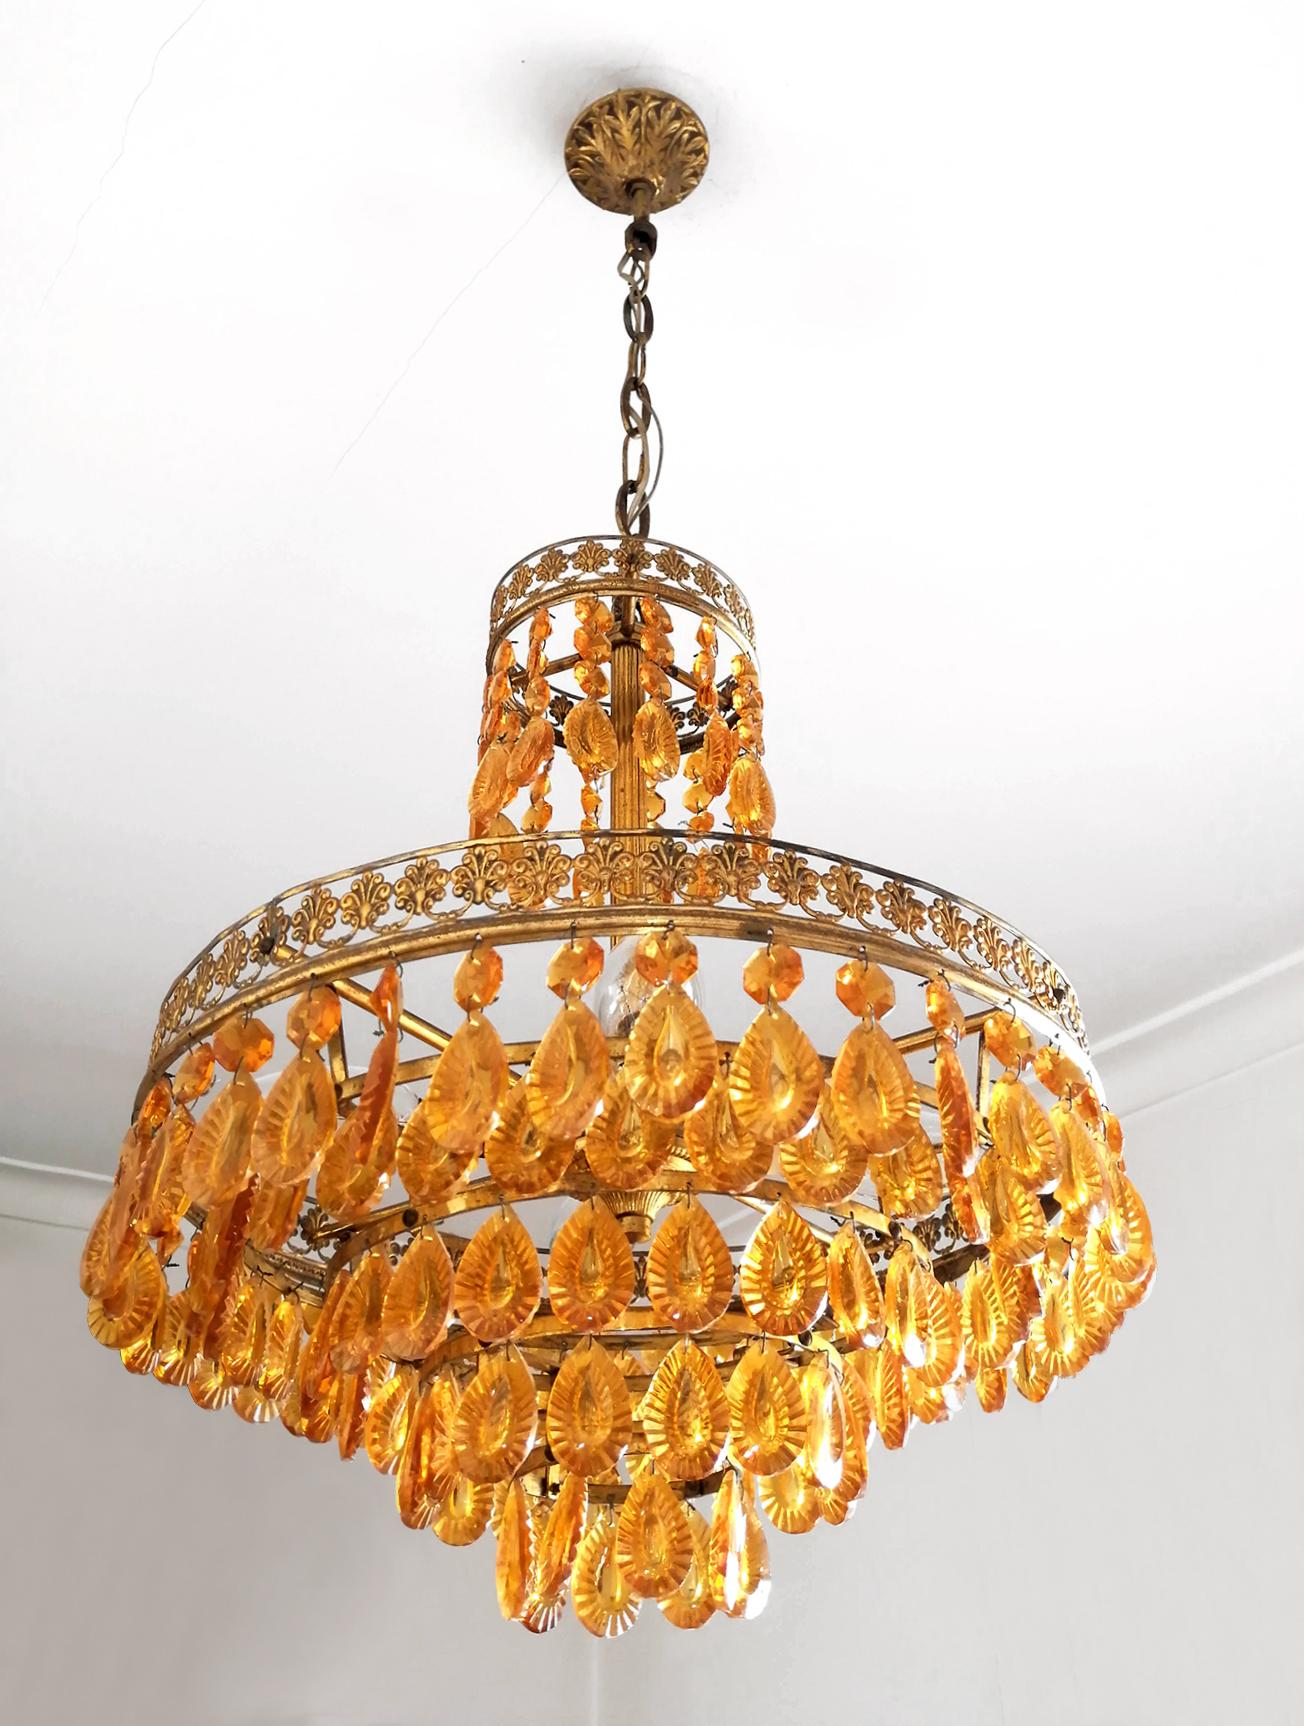 Beautiful Italian Murano chandelier with 6 layers of amber glass drops
Dimensions:
Height 31.5 in. (chain=10.62 in) / 80 cm (chain= 27 cm)
Diameter 13.78 in. (35 cm)
4-light bulbs E 14/ good working condition/
Assembly required. Bulbs not